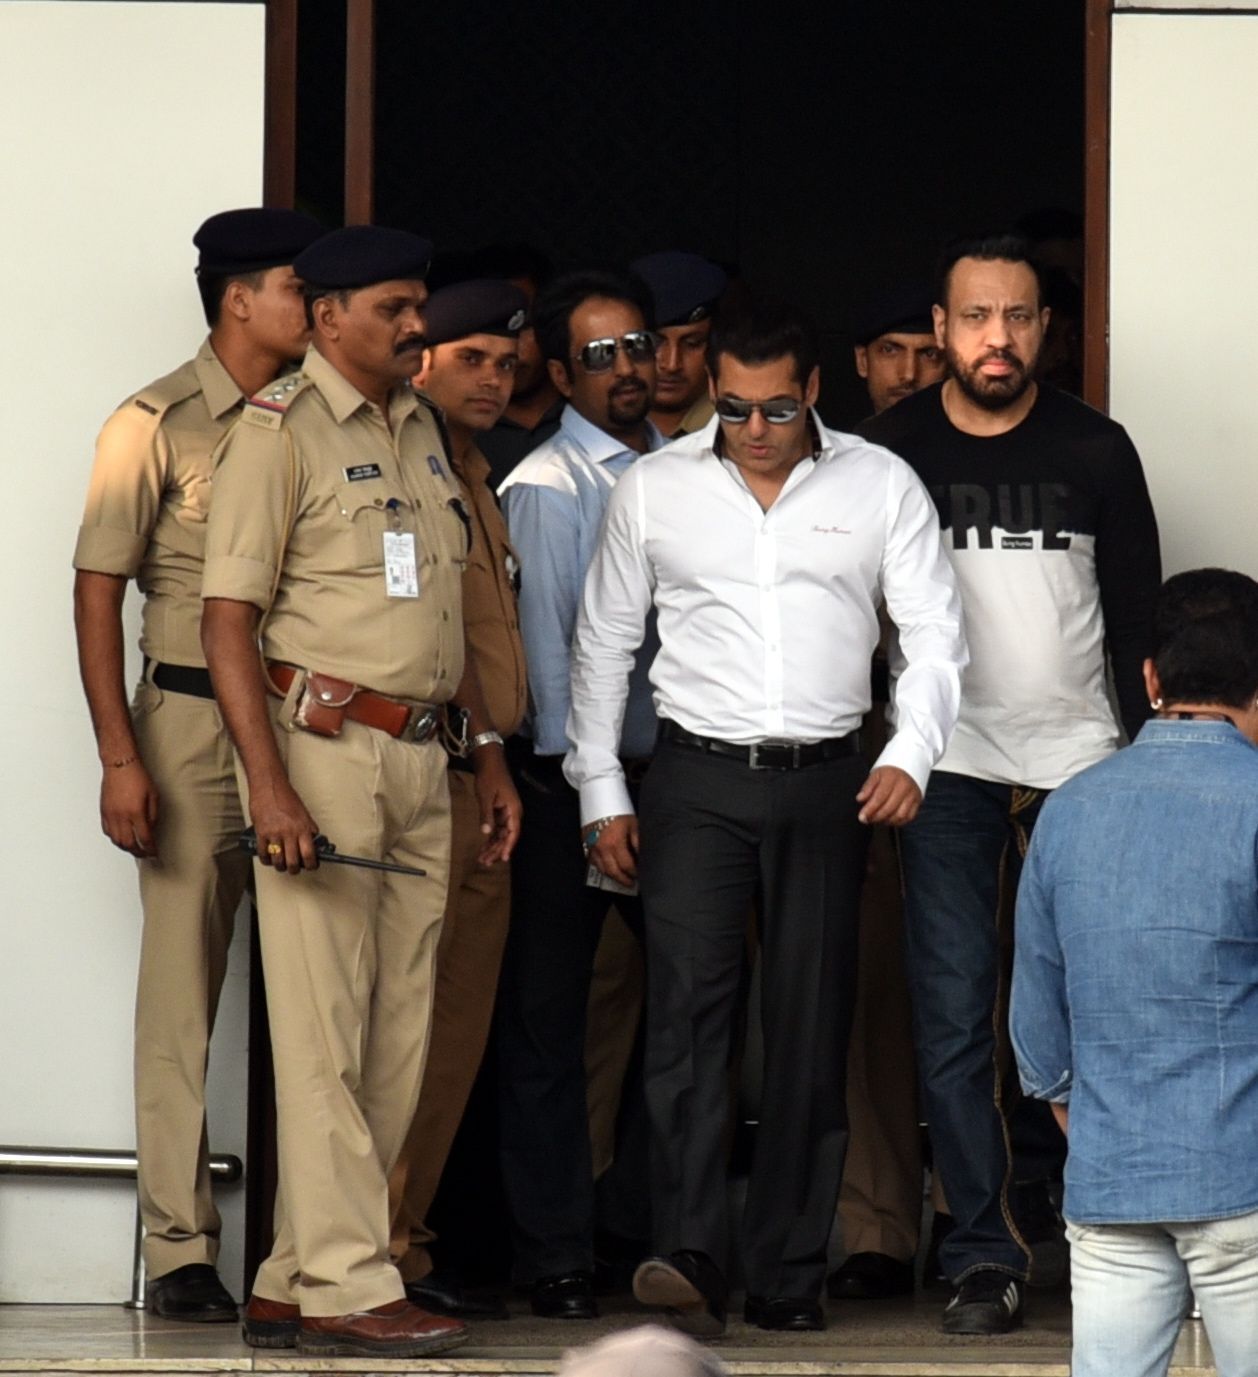 Pics: Salman Khan snapped on arrival at Mumbai Domestic Airport on arrival from Jodhpur | Picture 1462392